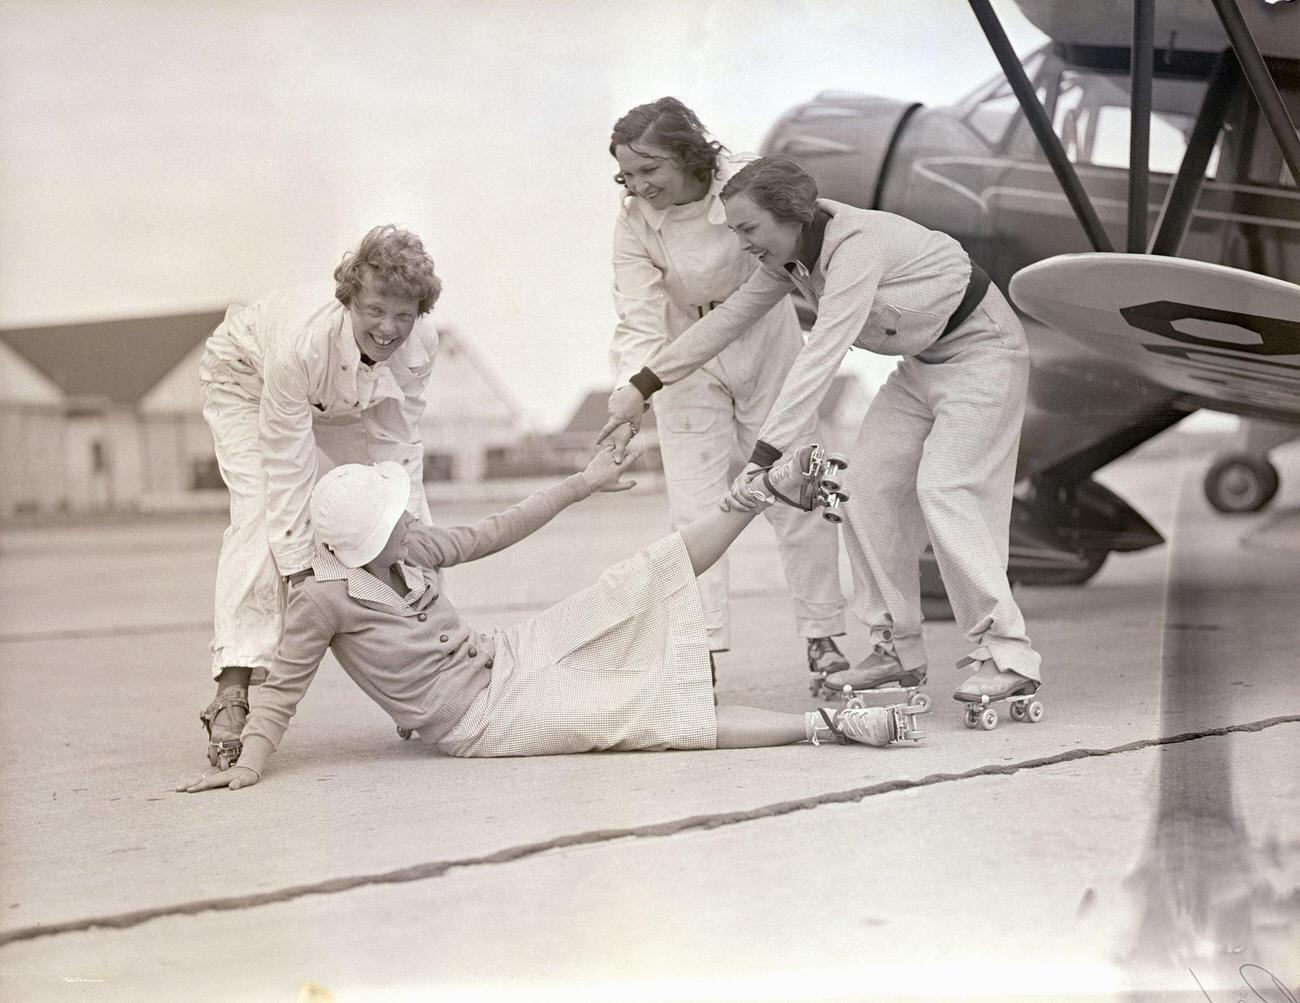 Amelia Earhart and Aviatrices Help a Fallen Skater, 1933.